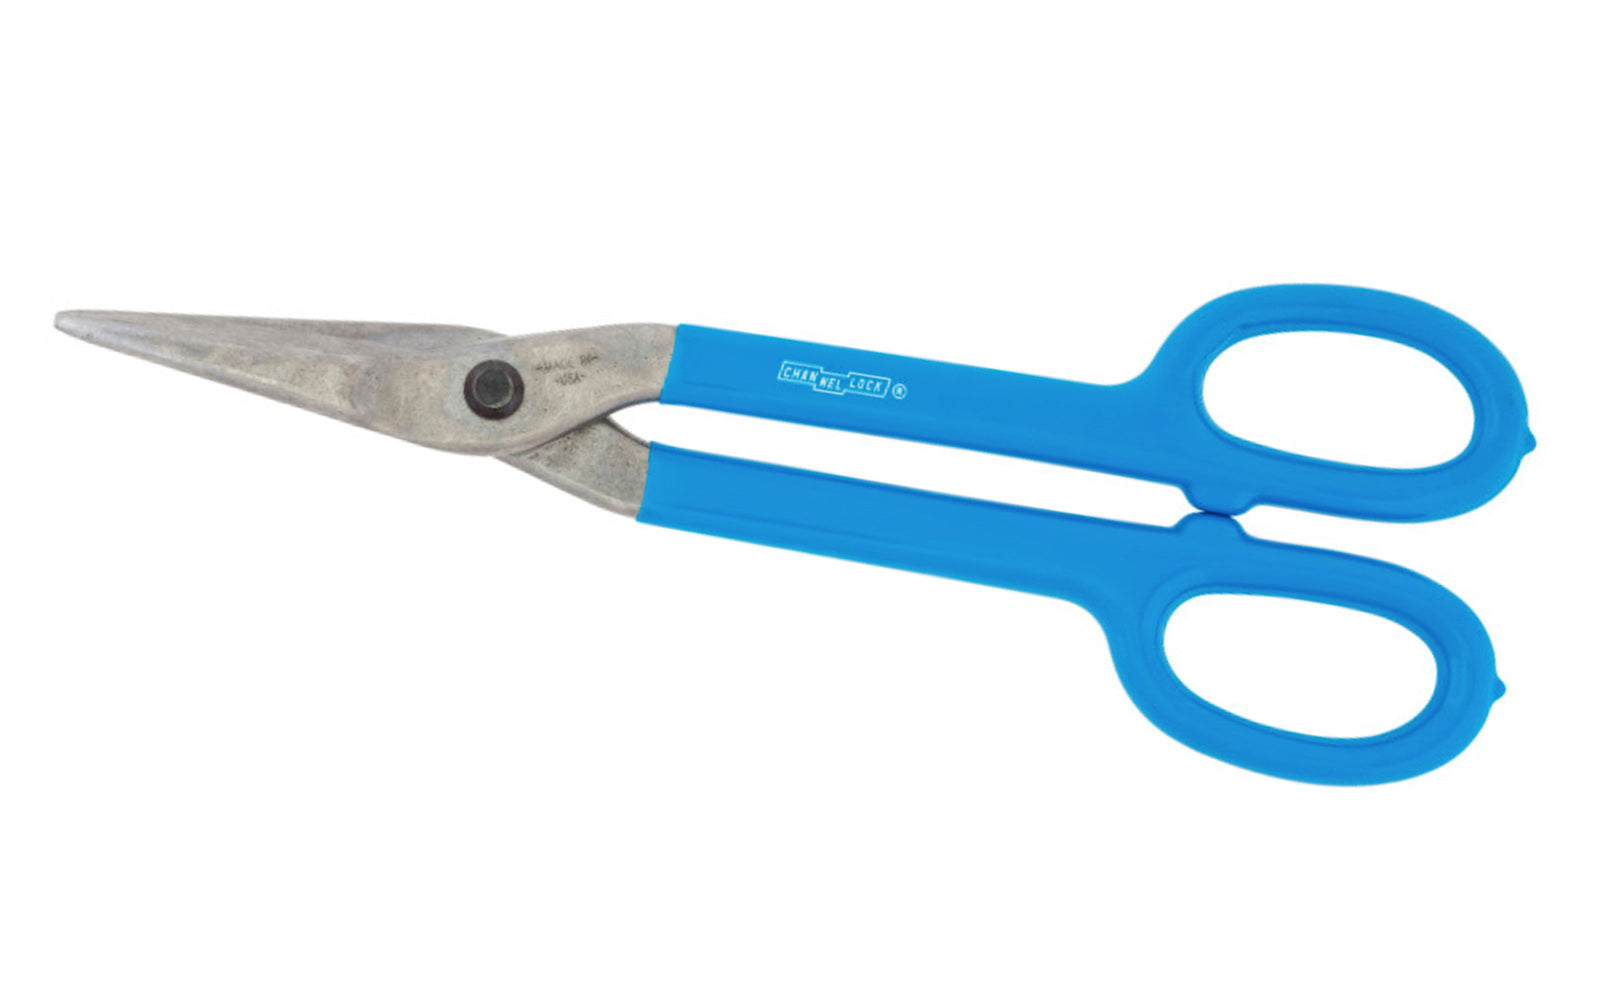 These 12" Duckbill Tinner Snips cuts straight, wide, & tight curves in any direction. Custom head-treated blades precision machined to last longer. Grips designed for durability & comfort. Channelock Tin Snips are 100% Made in the USA & forged from molybdenum alloy steel. Channellock Model 612TD.  Made in USA.